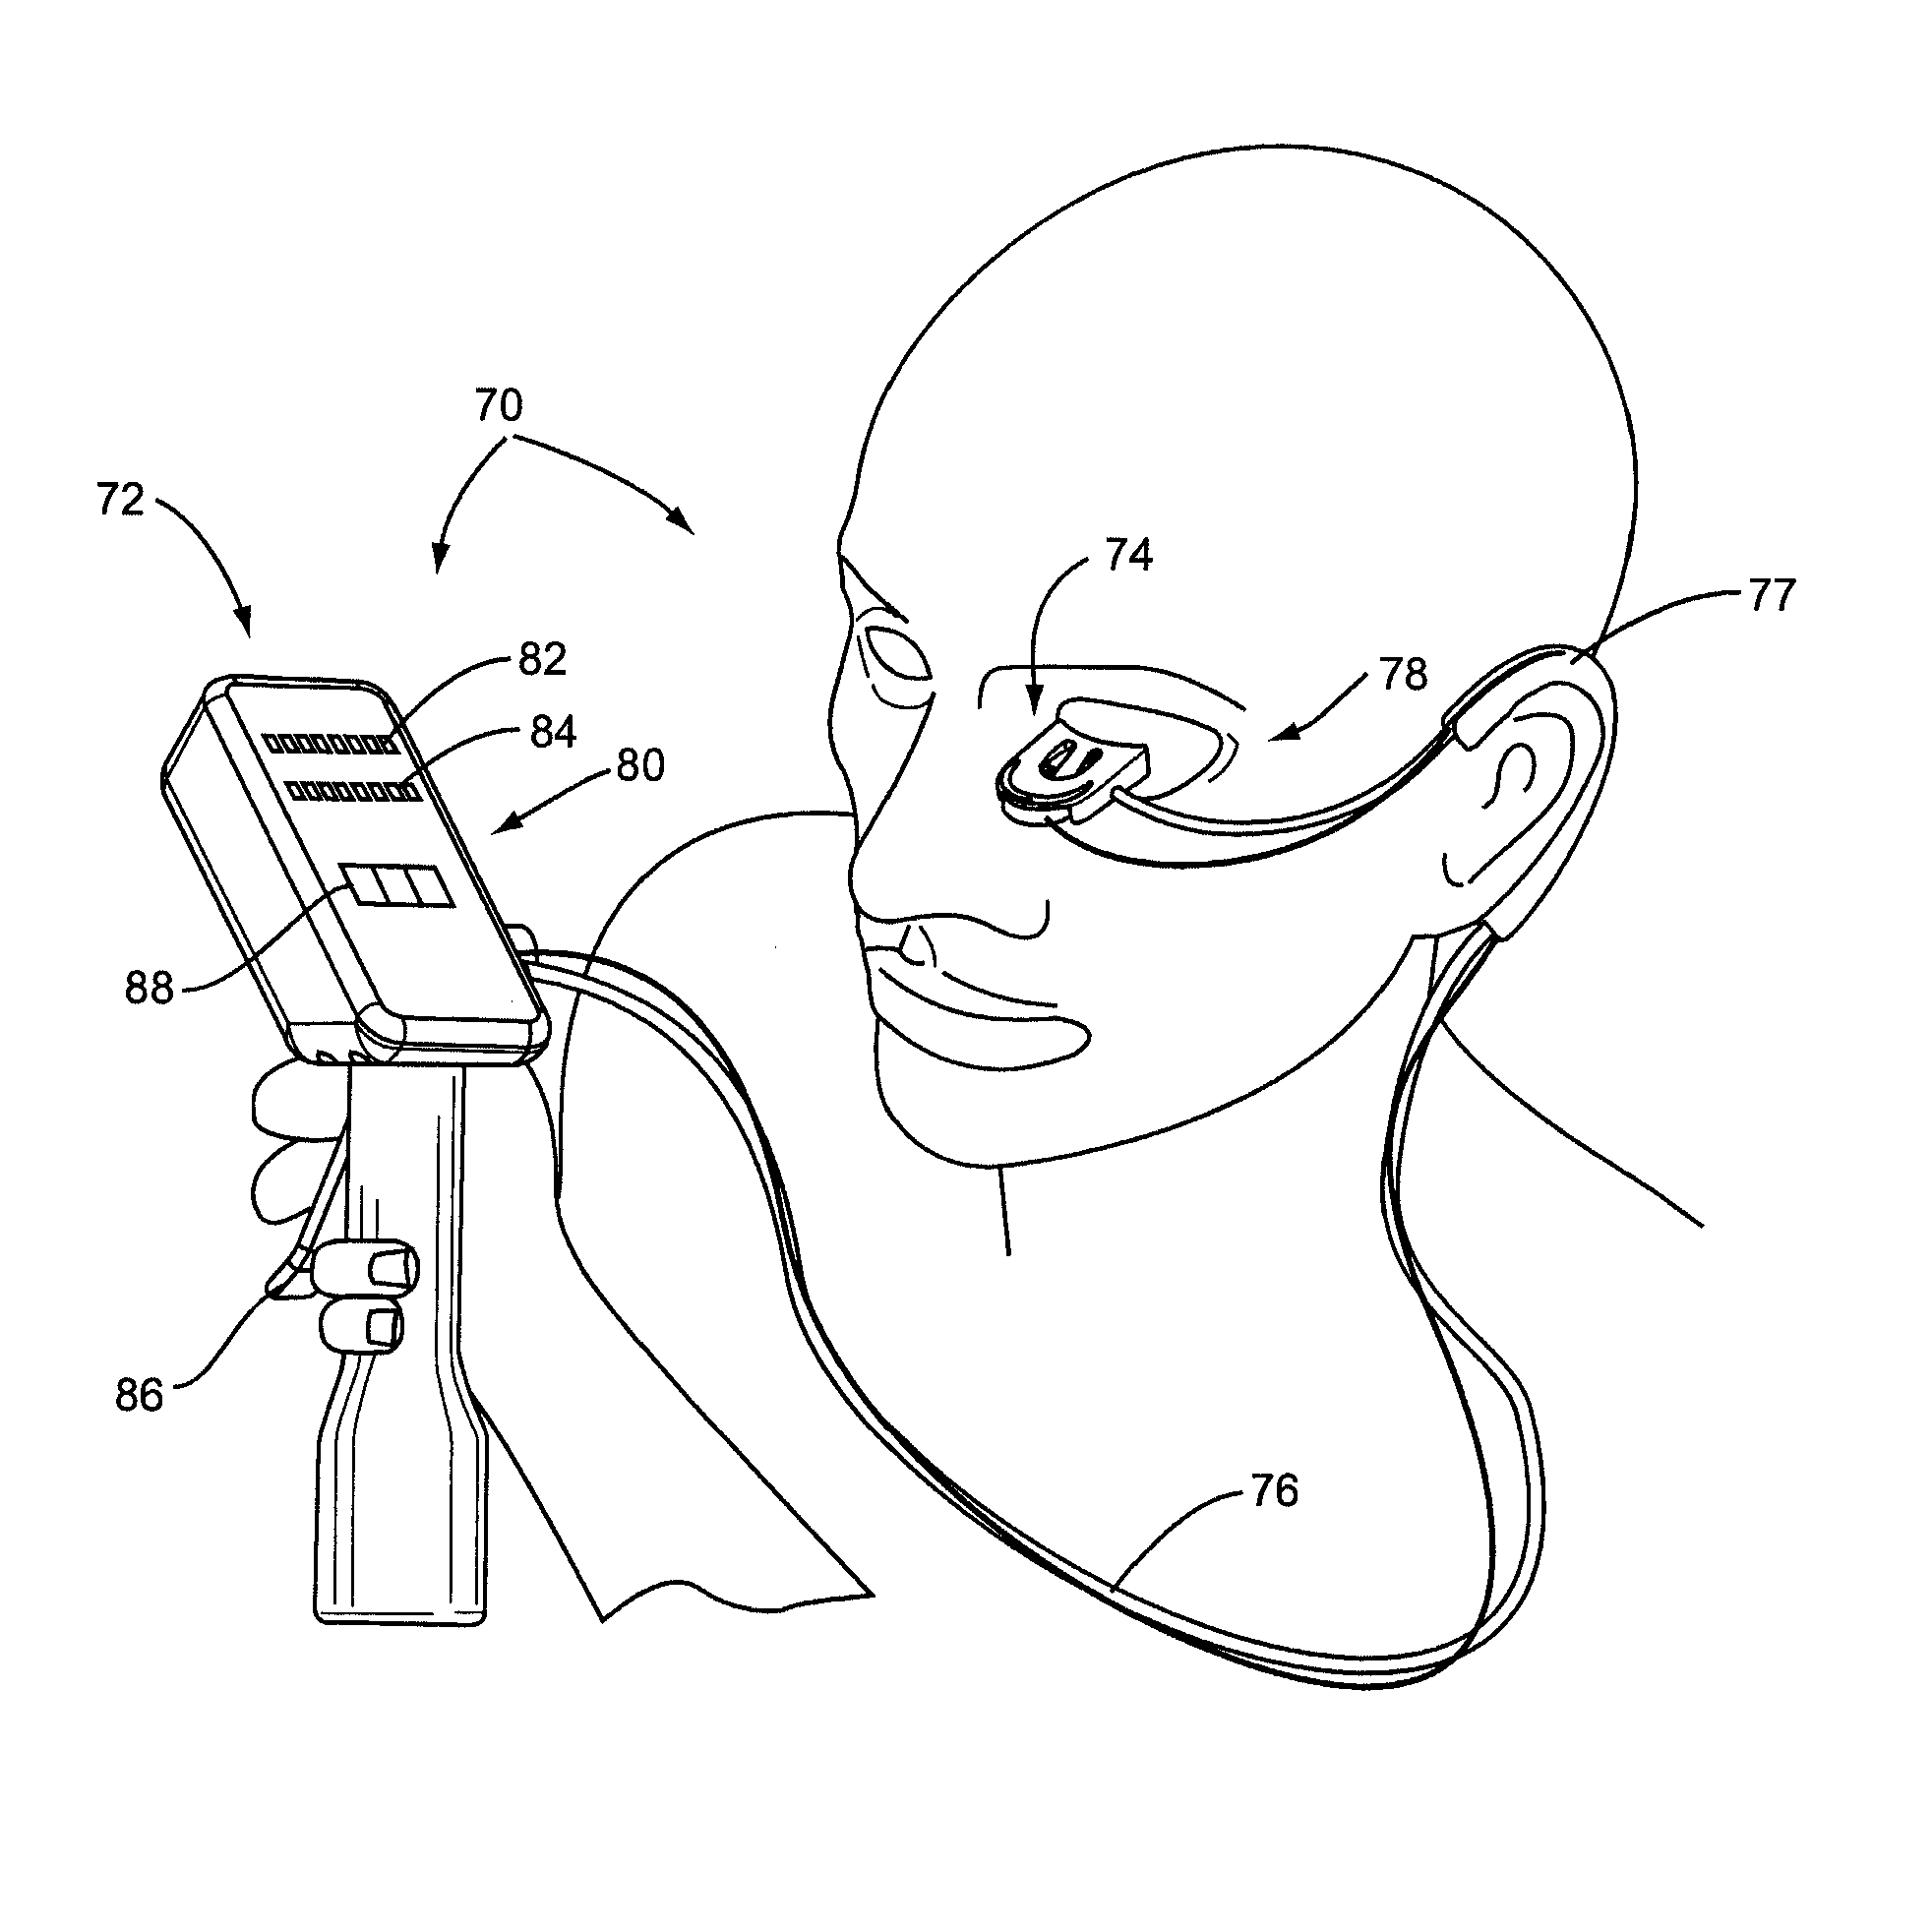 System for inner eyelid treatment of meibomian gland dysfunction